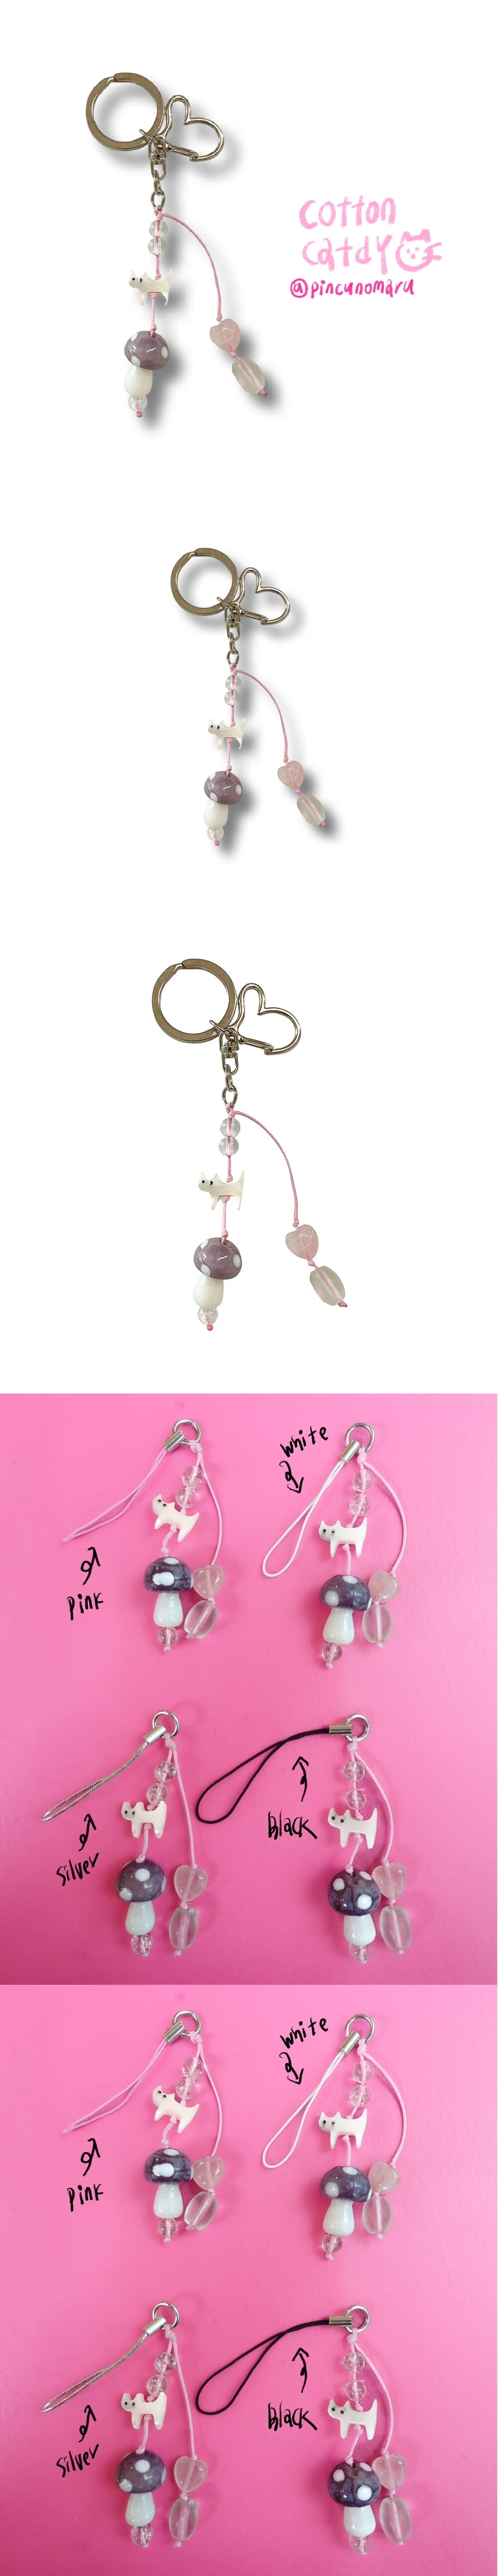 Cotton catdy keyring-Phone Strap